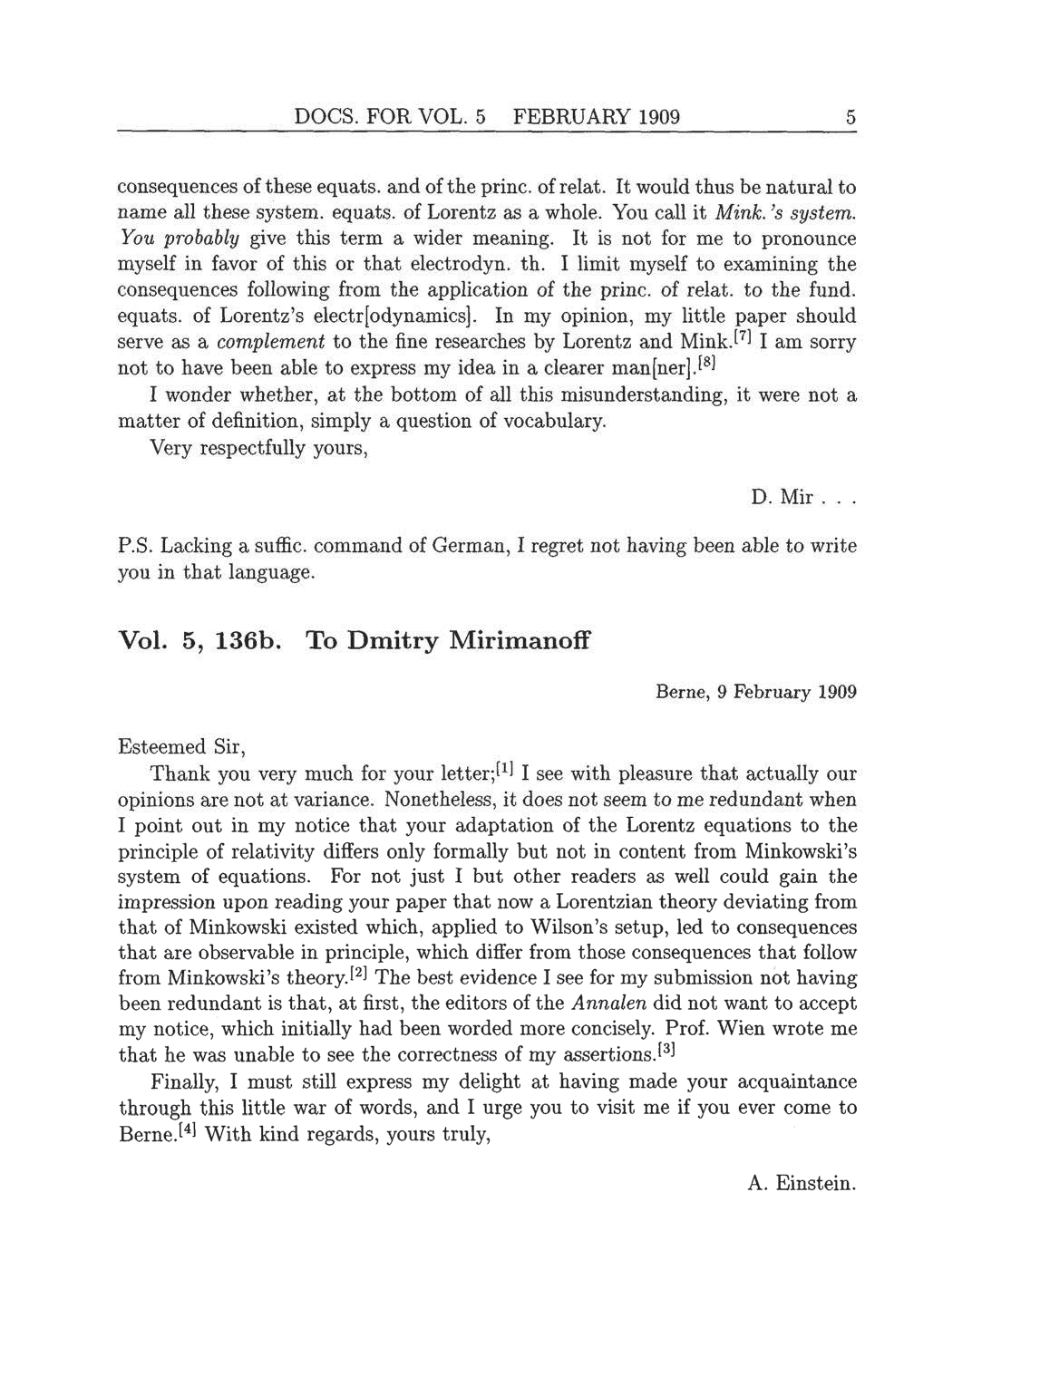 Volume 8: The Berlin Years: Correspondence, 1914-1918 (English translation supplement) page 5